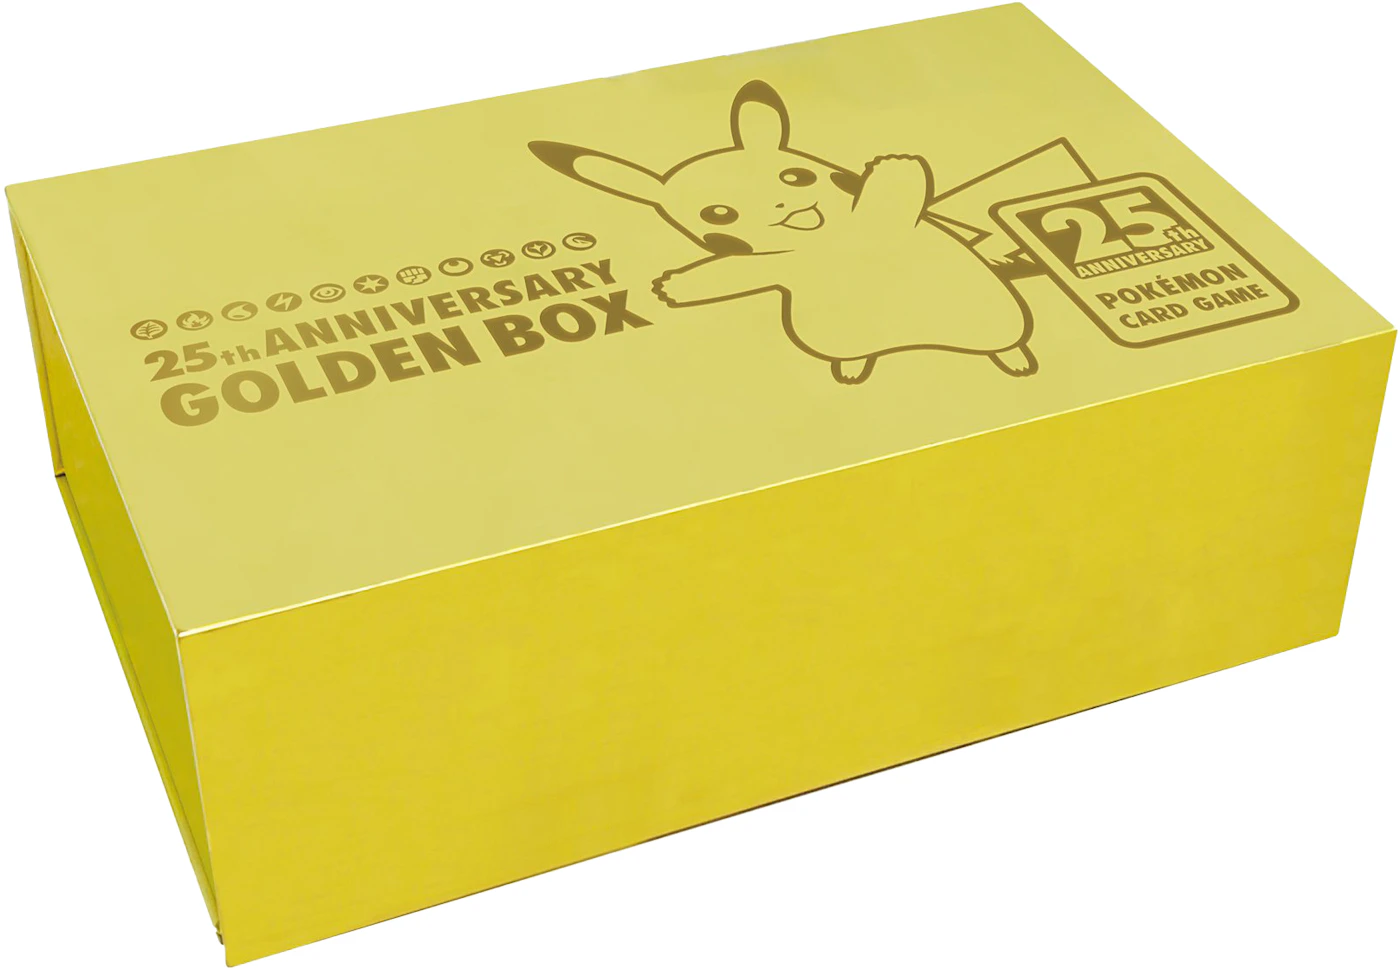 Pokémon TCG 25th Anniversary Collection Golden Box (Traditional Chinese) -  US